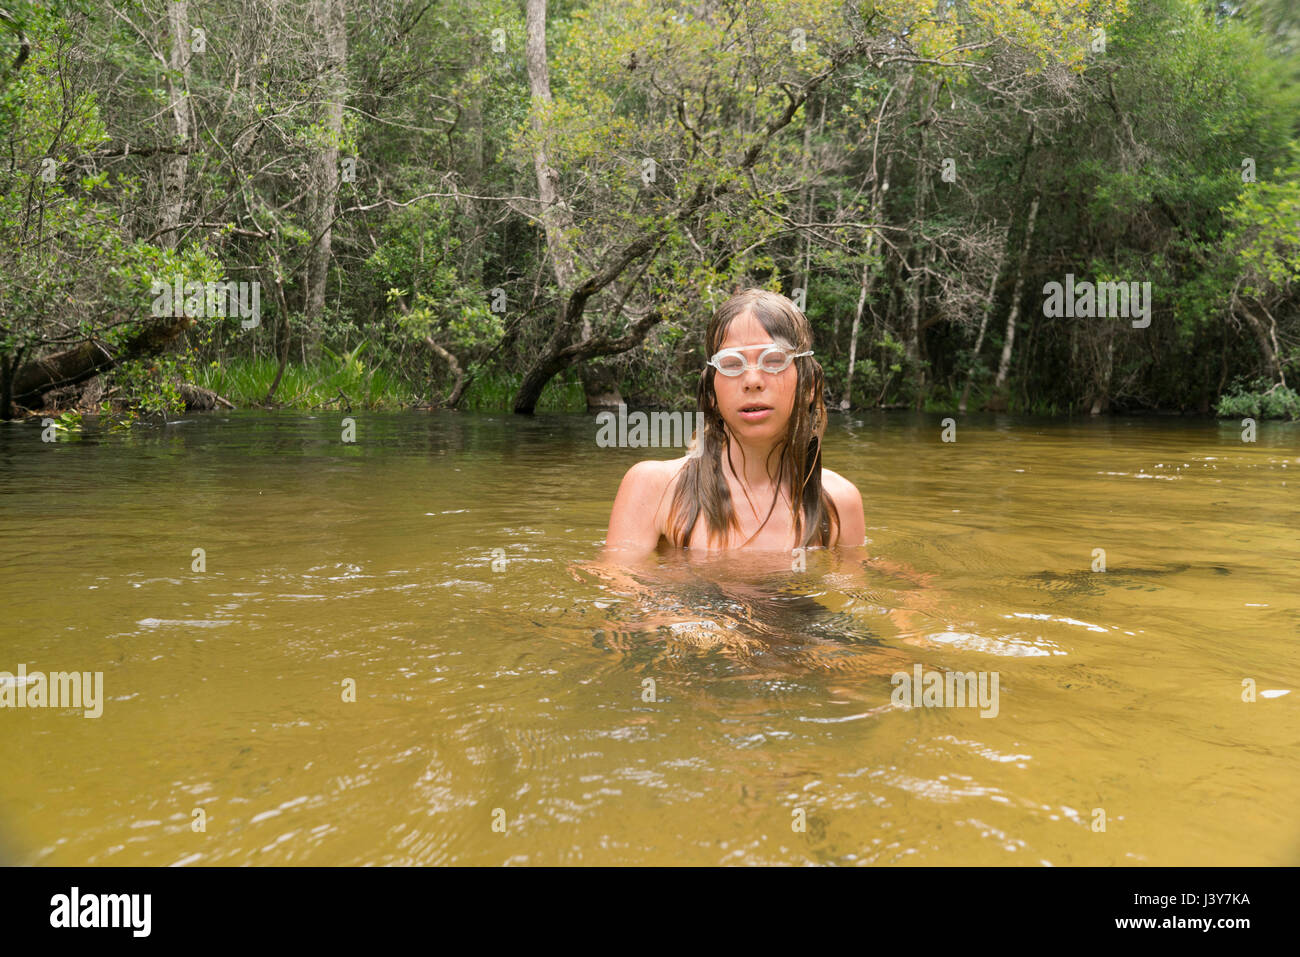 Teenager tragen Swimming goggles in See, Niceville, Florida, USA Stockfoto